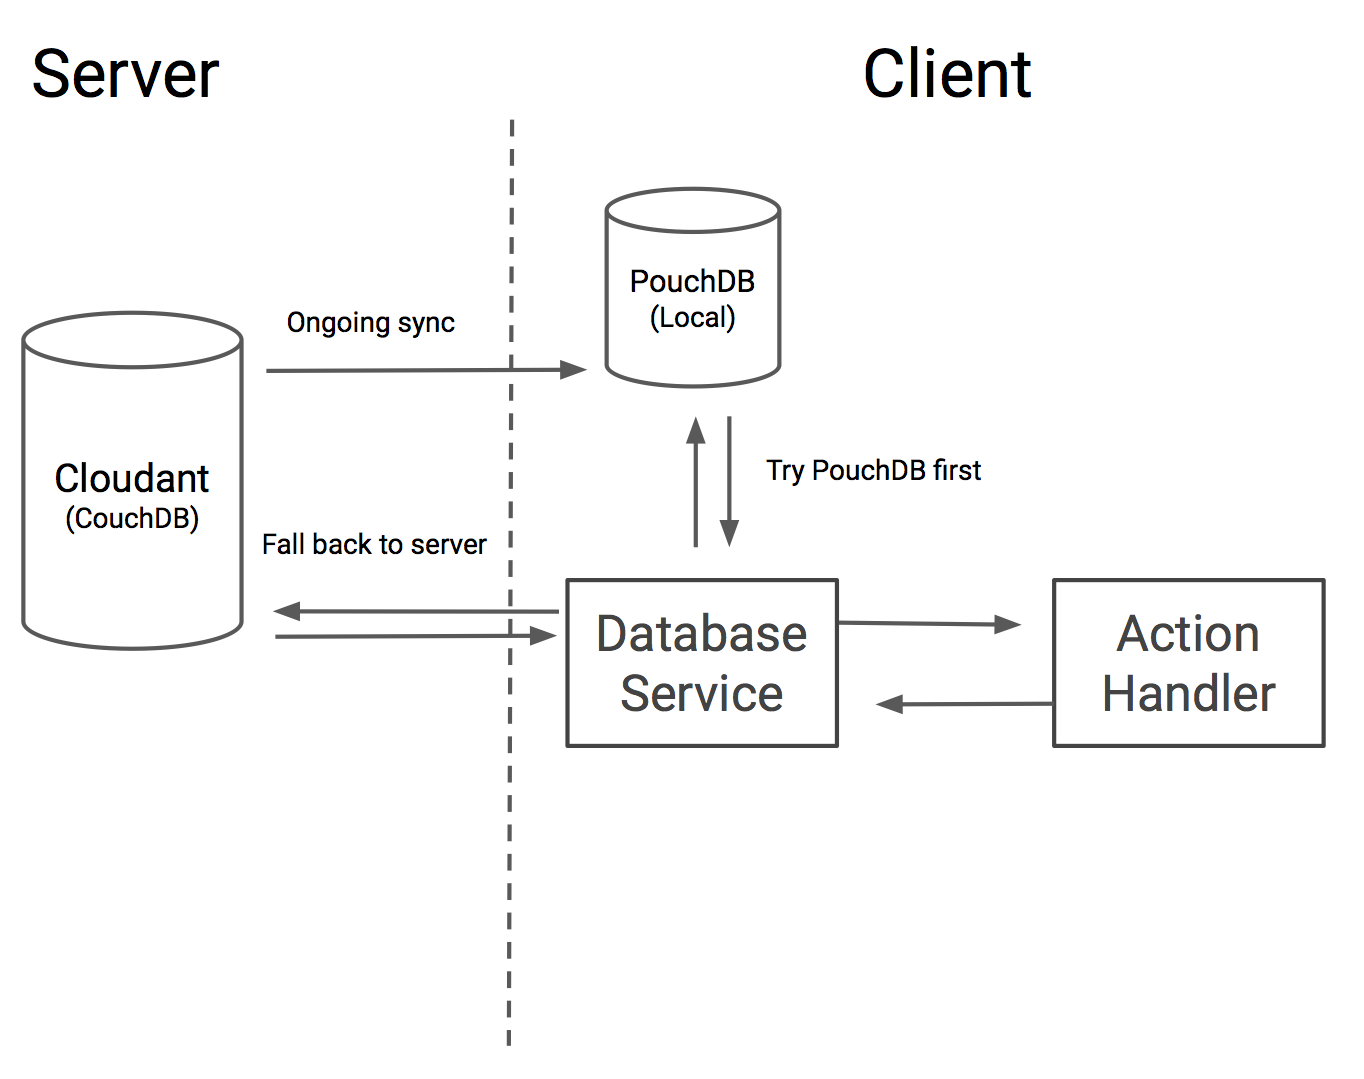 Diagram showing an offline-first architecture where we try a local PouchDB first and fall back to the network, and PouchDB continually syncs with Cloudant